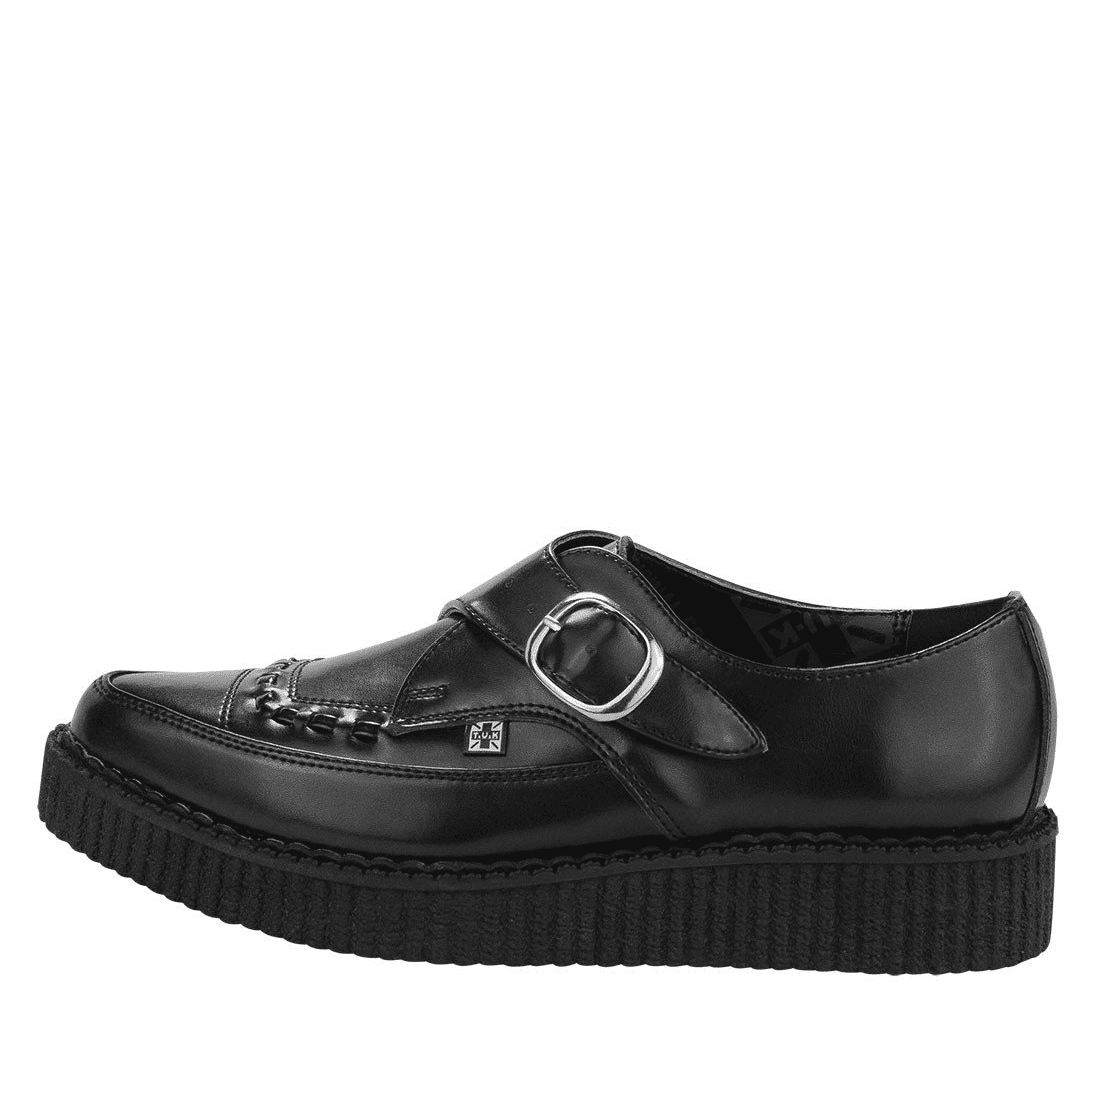 TUK Black Leather Pointed Creeper A8520